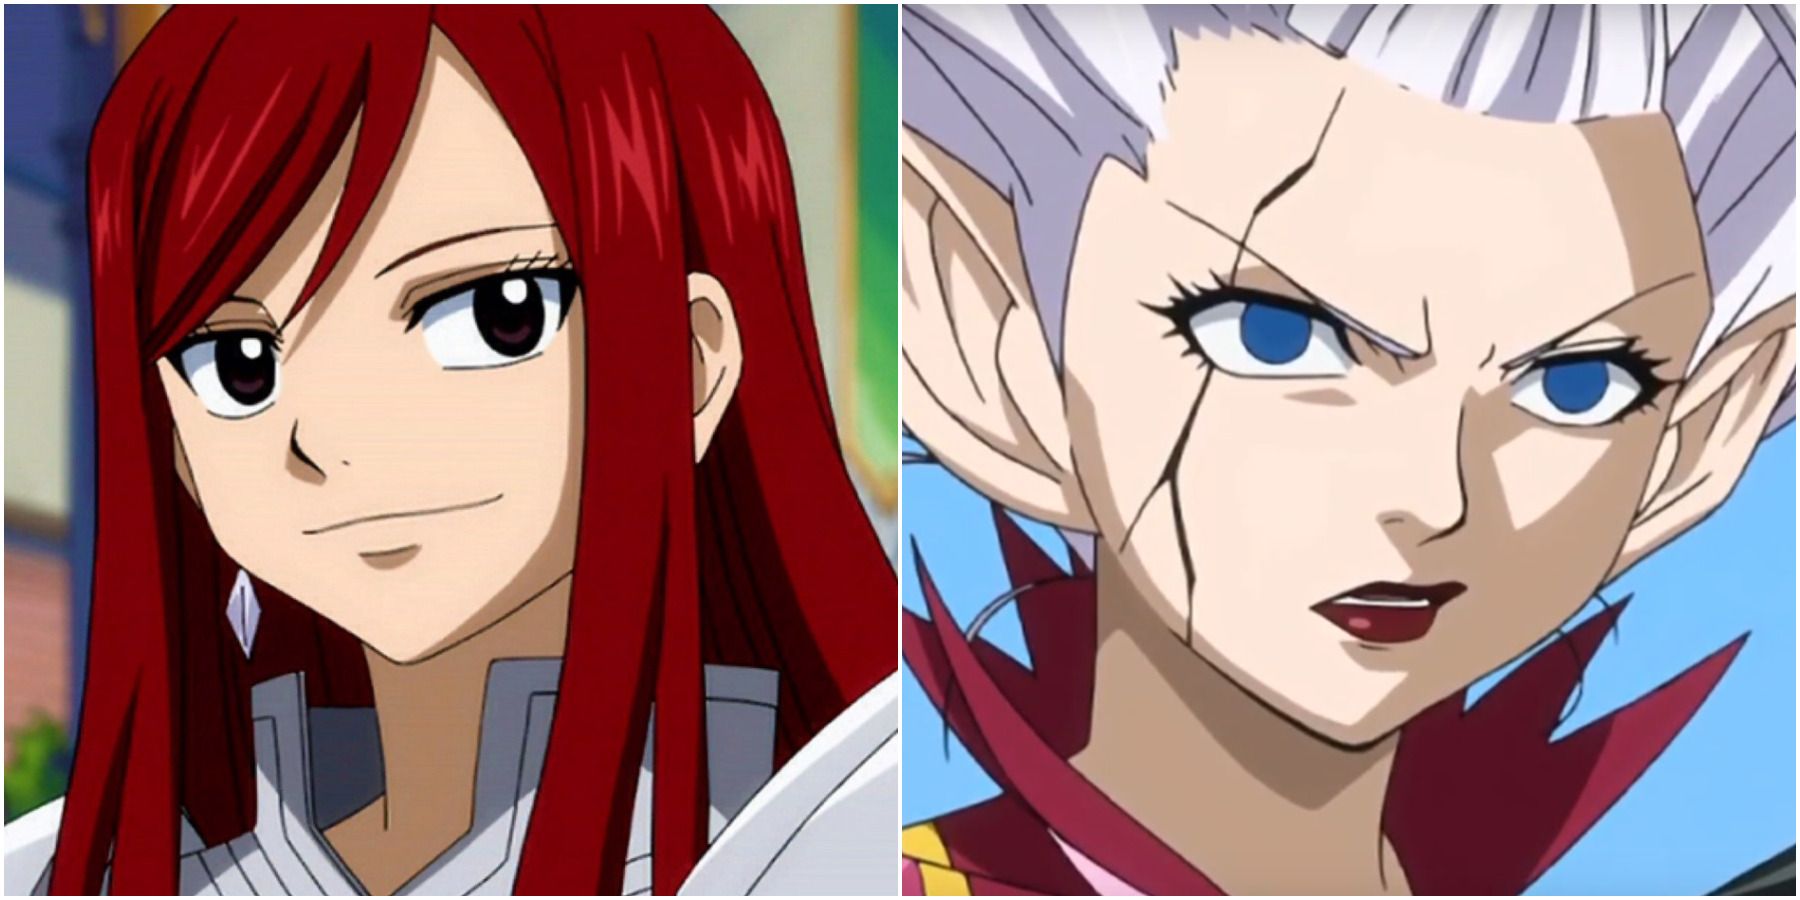 erza and mirajane from fairy tail